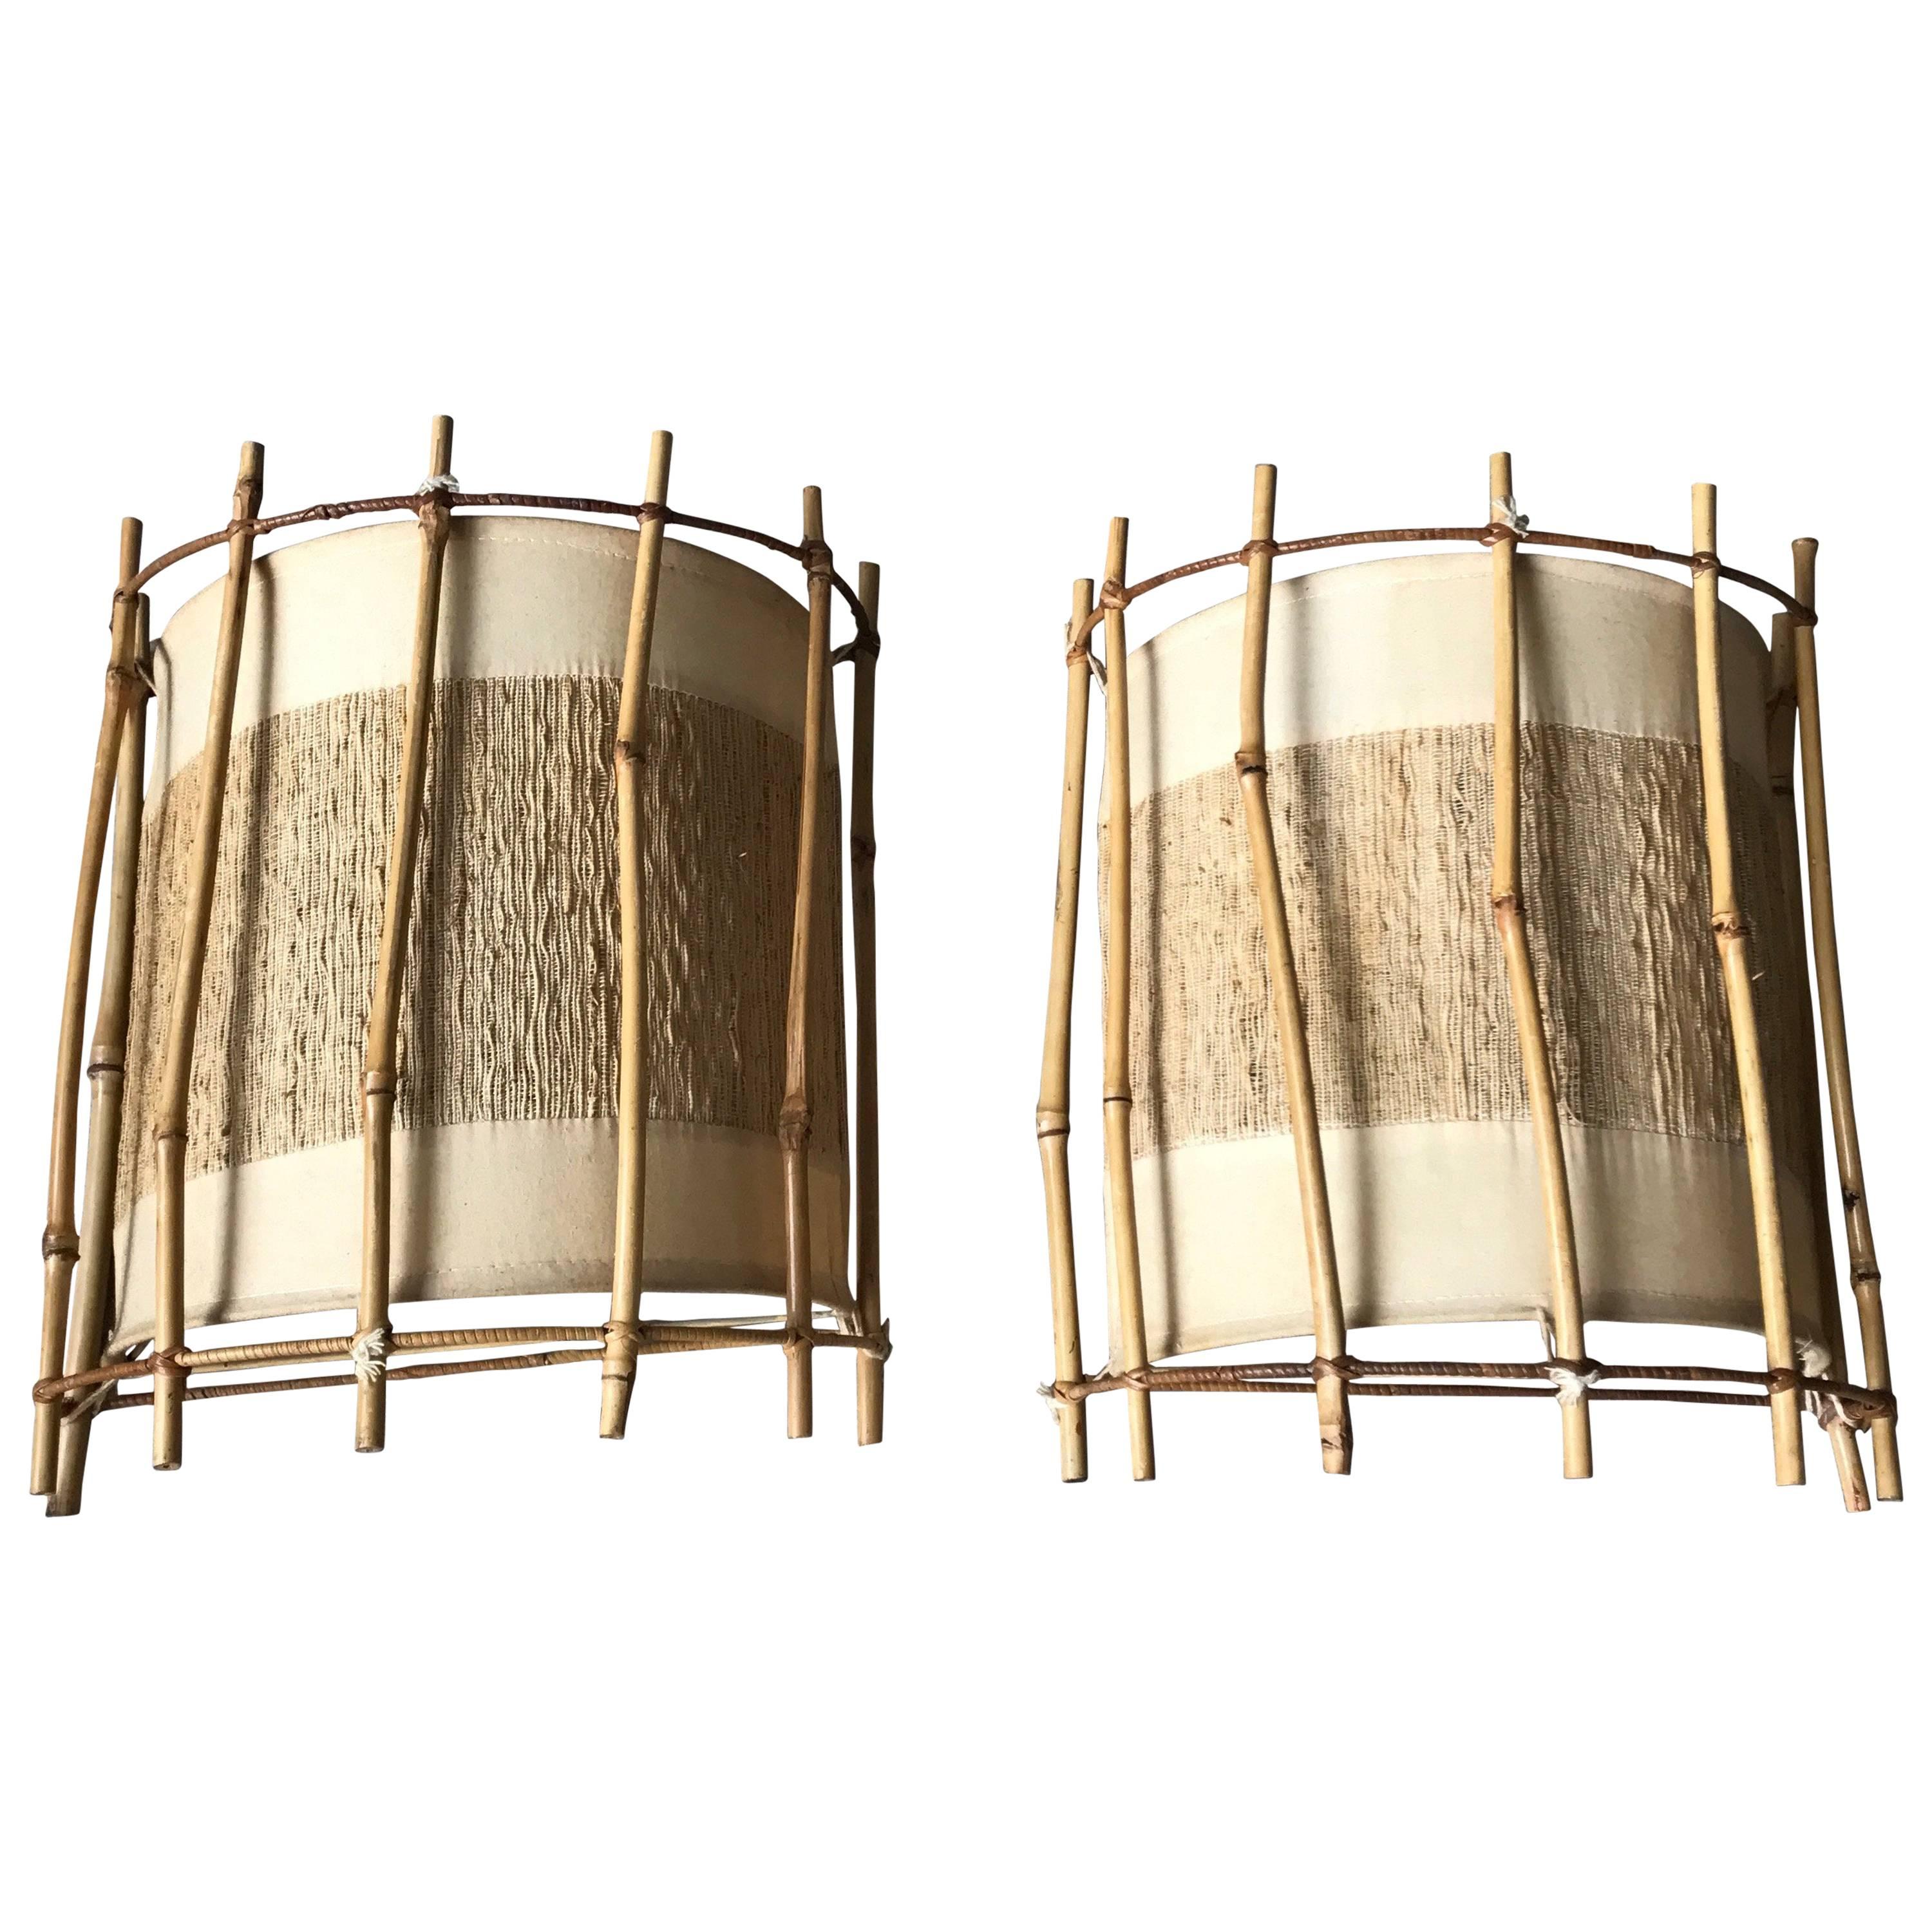 Mid-Century Organic Design Pair of Bamboo Wall Sconces Vintage Set of Lamps